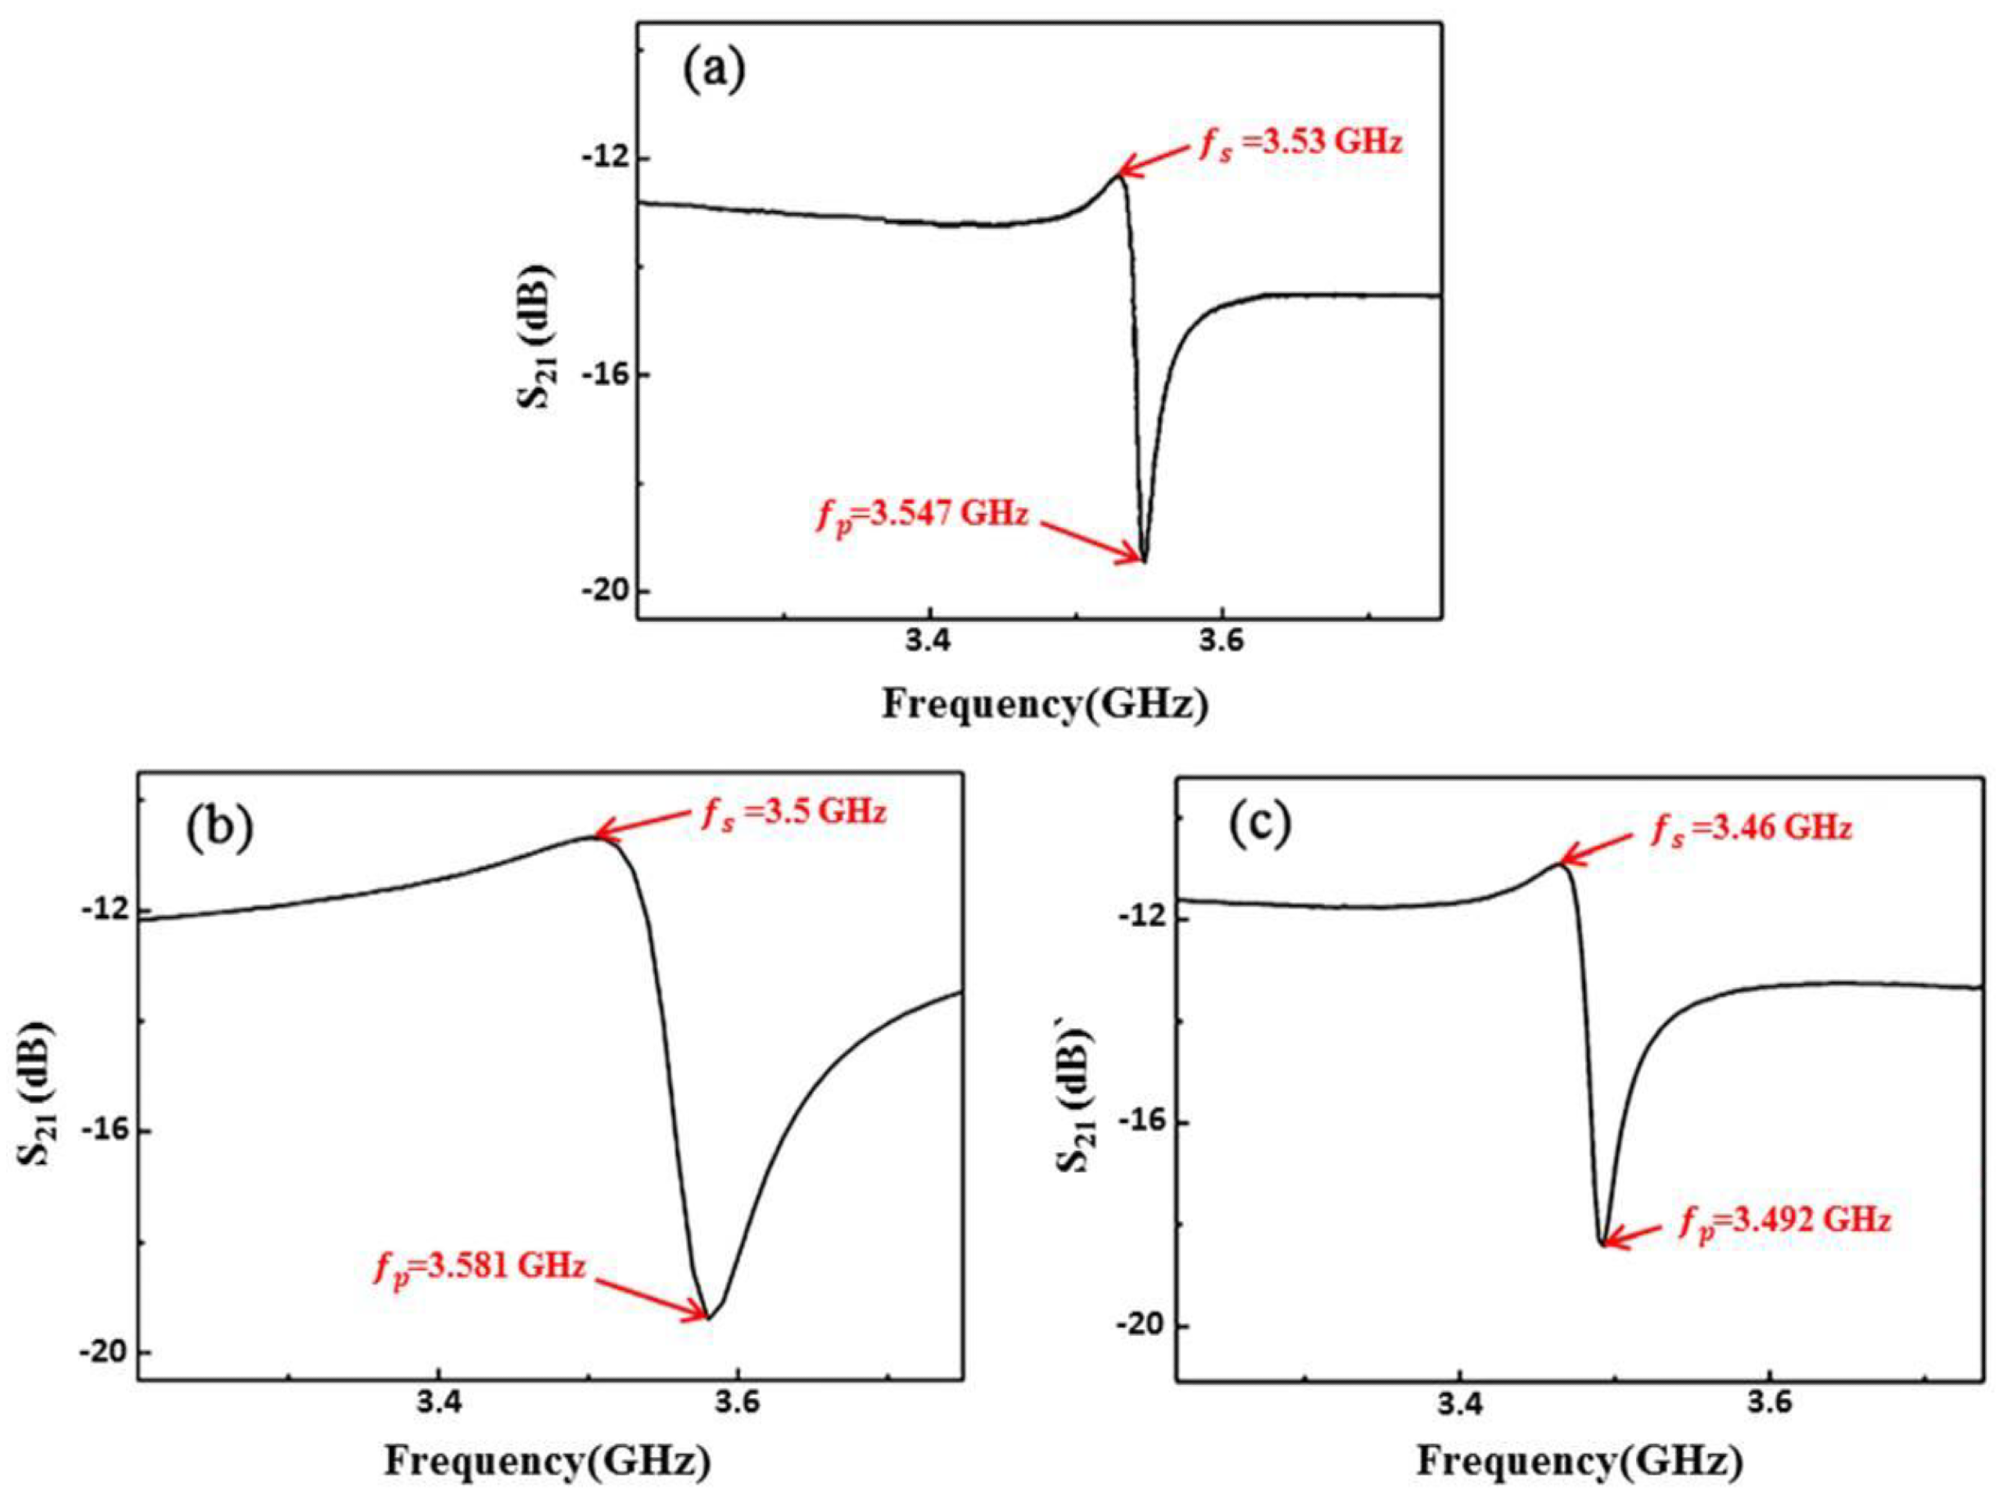 Frequency responses (S21) of SMR resonators using AlScN and AlN as piezoelectric layers, (a) experimental results of AlN-based resonator, (b) simulation results of AlScN-based resonator, and (c) experimental results of AlScN-based resonator.